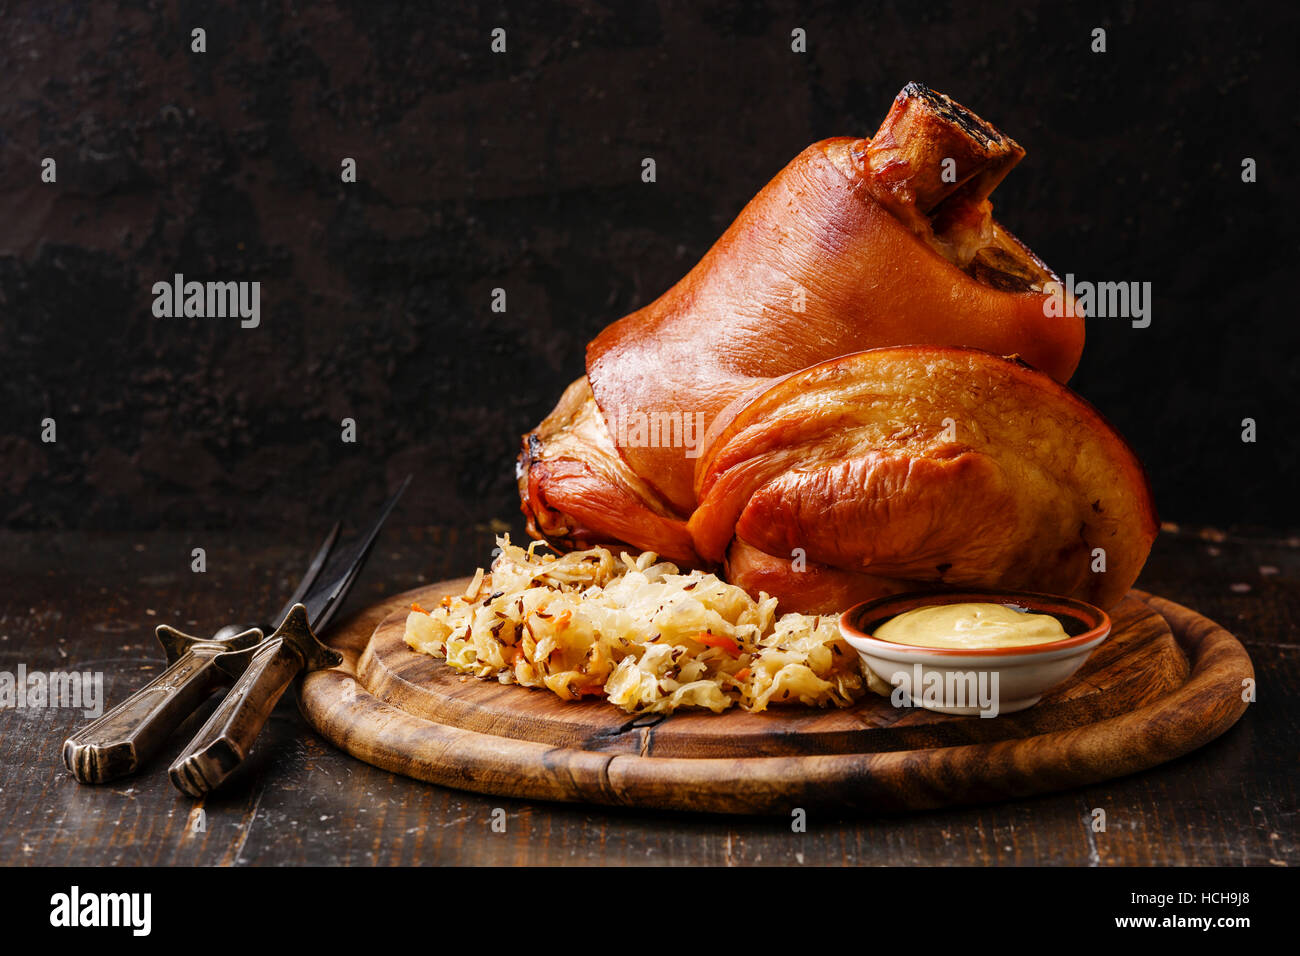 Roasted pork knuckle eisbein with braised boiled cabbage and mustard on wooden cutting board Stock Photo